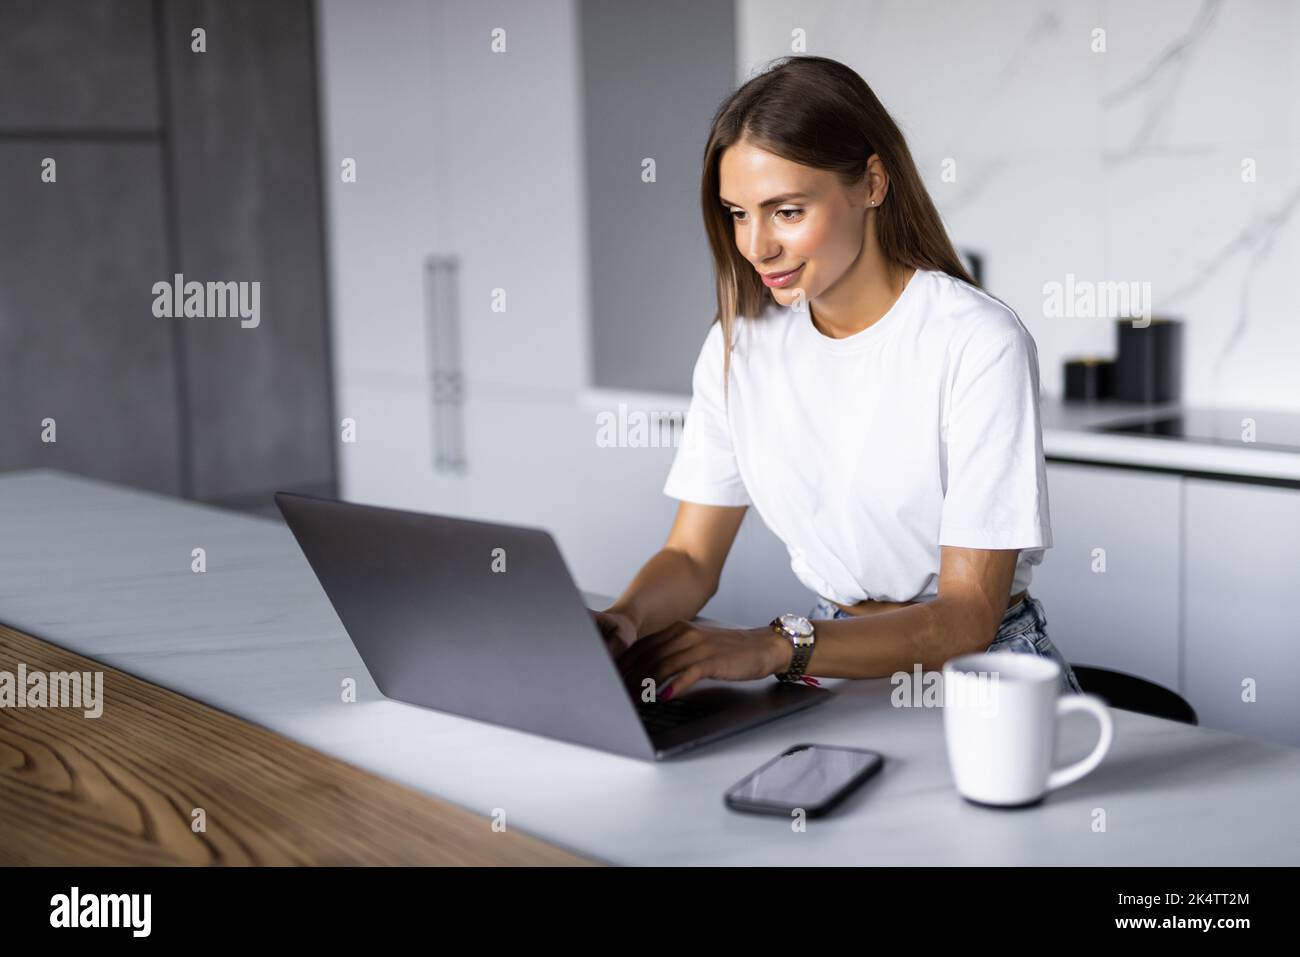 Shot of thoughtful young woman looking her laptop while holding a cup of coffee in the kitchen at home. Stock Photo